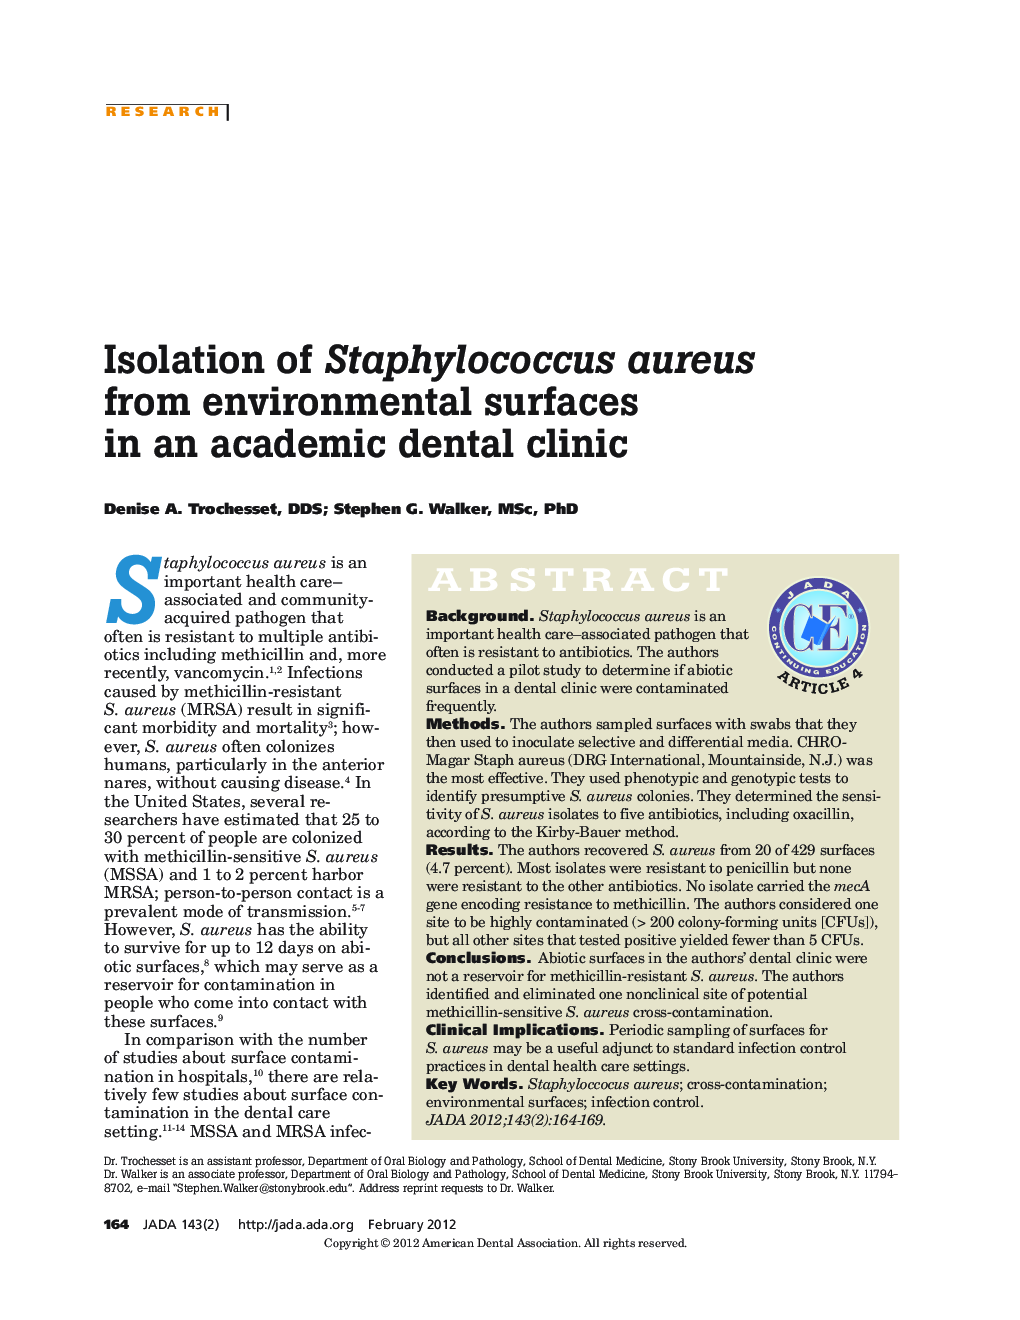 Isolation of Staphylococcus aureus from environmental surfaces in an academic dental clinic 